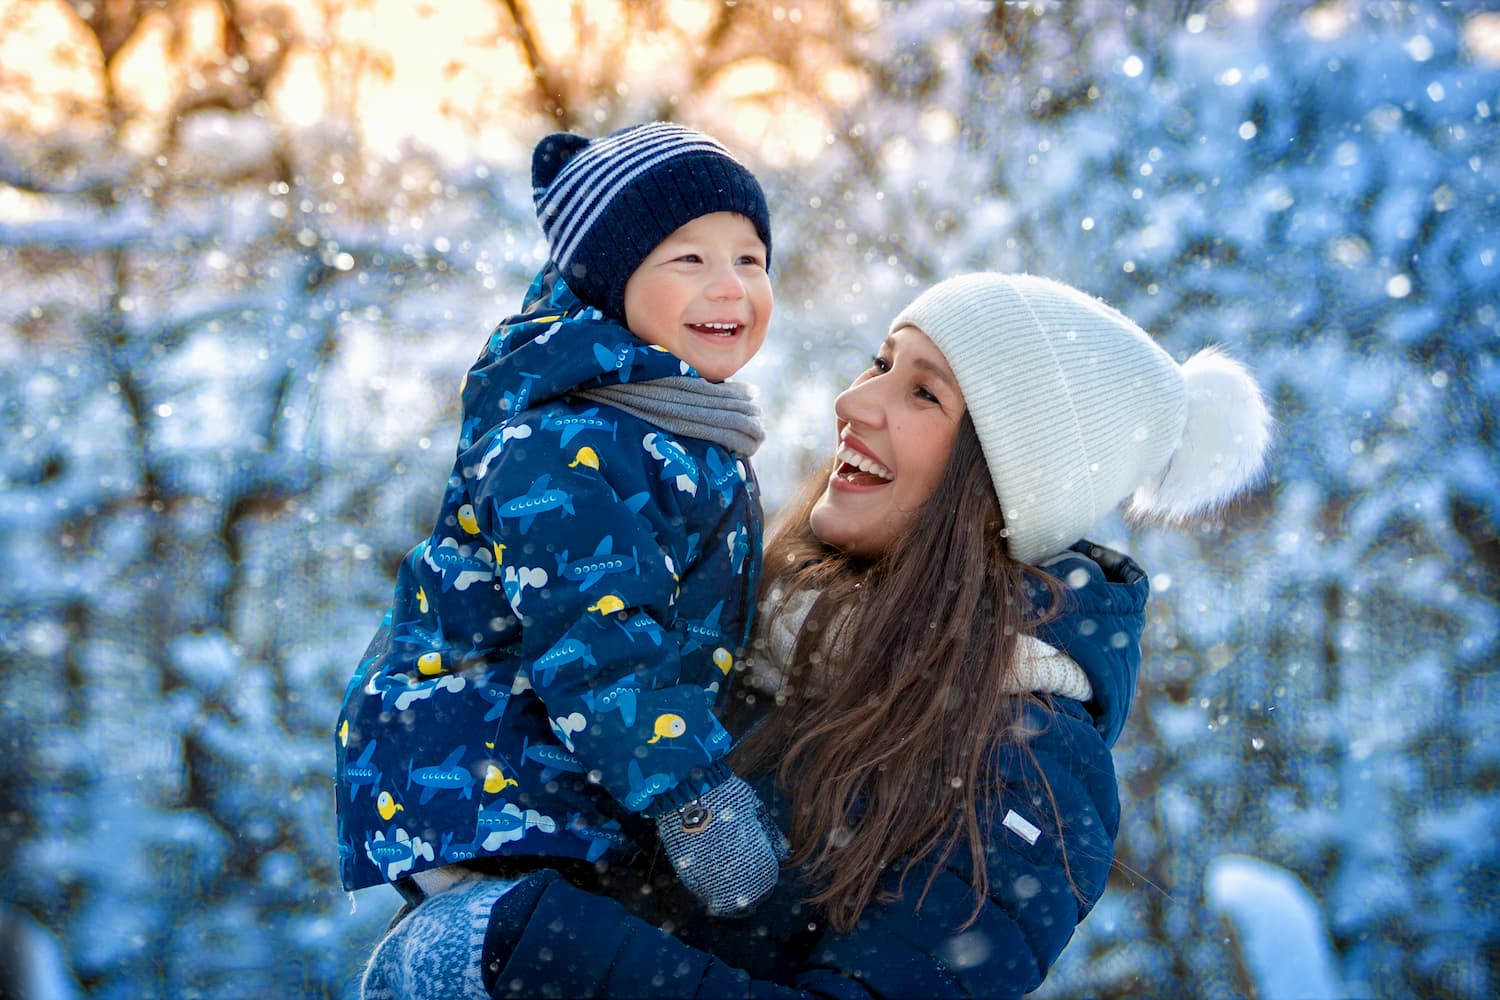 A mother smiling and holding her child in the snow